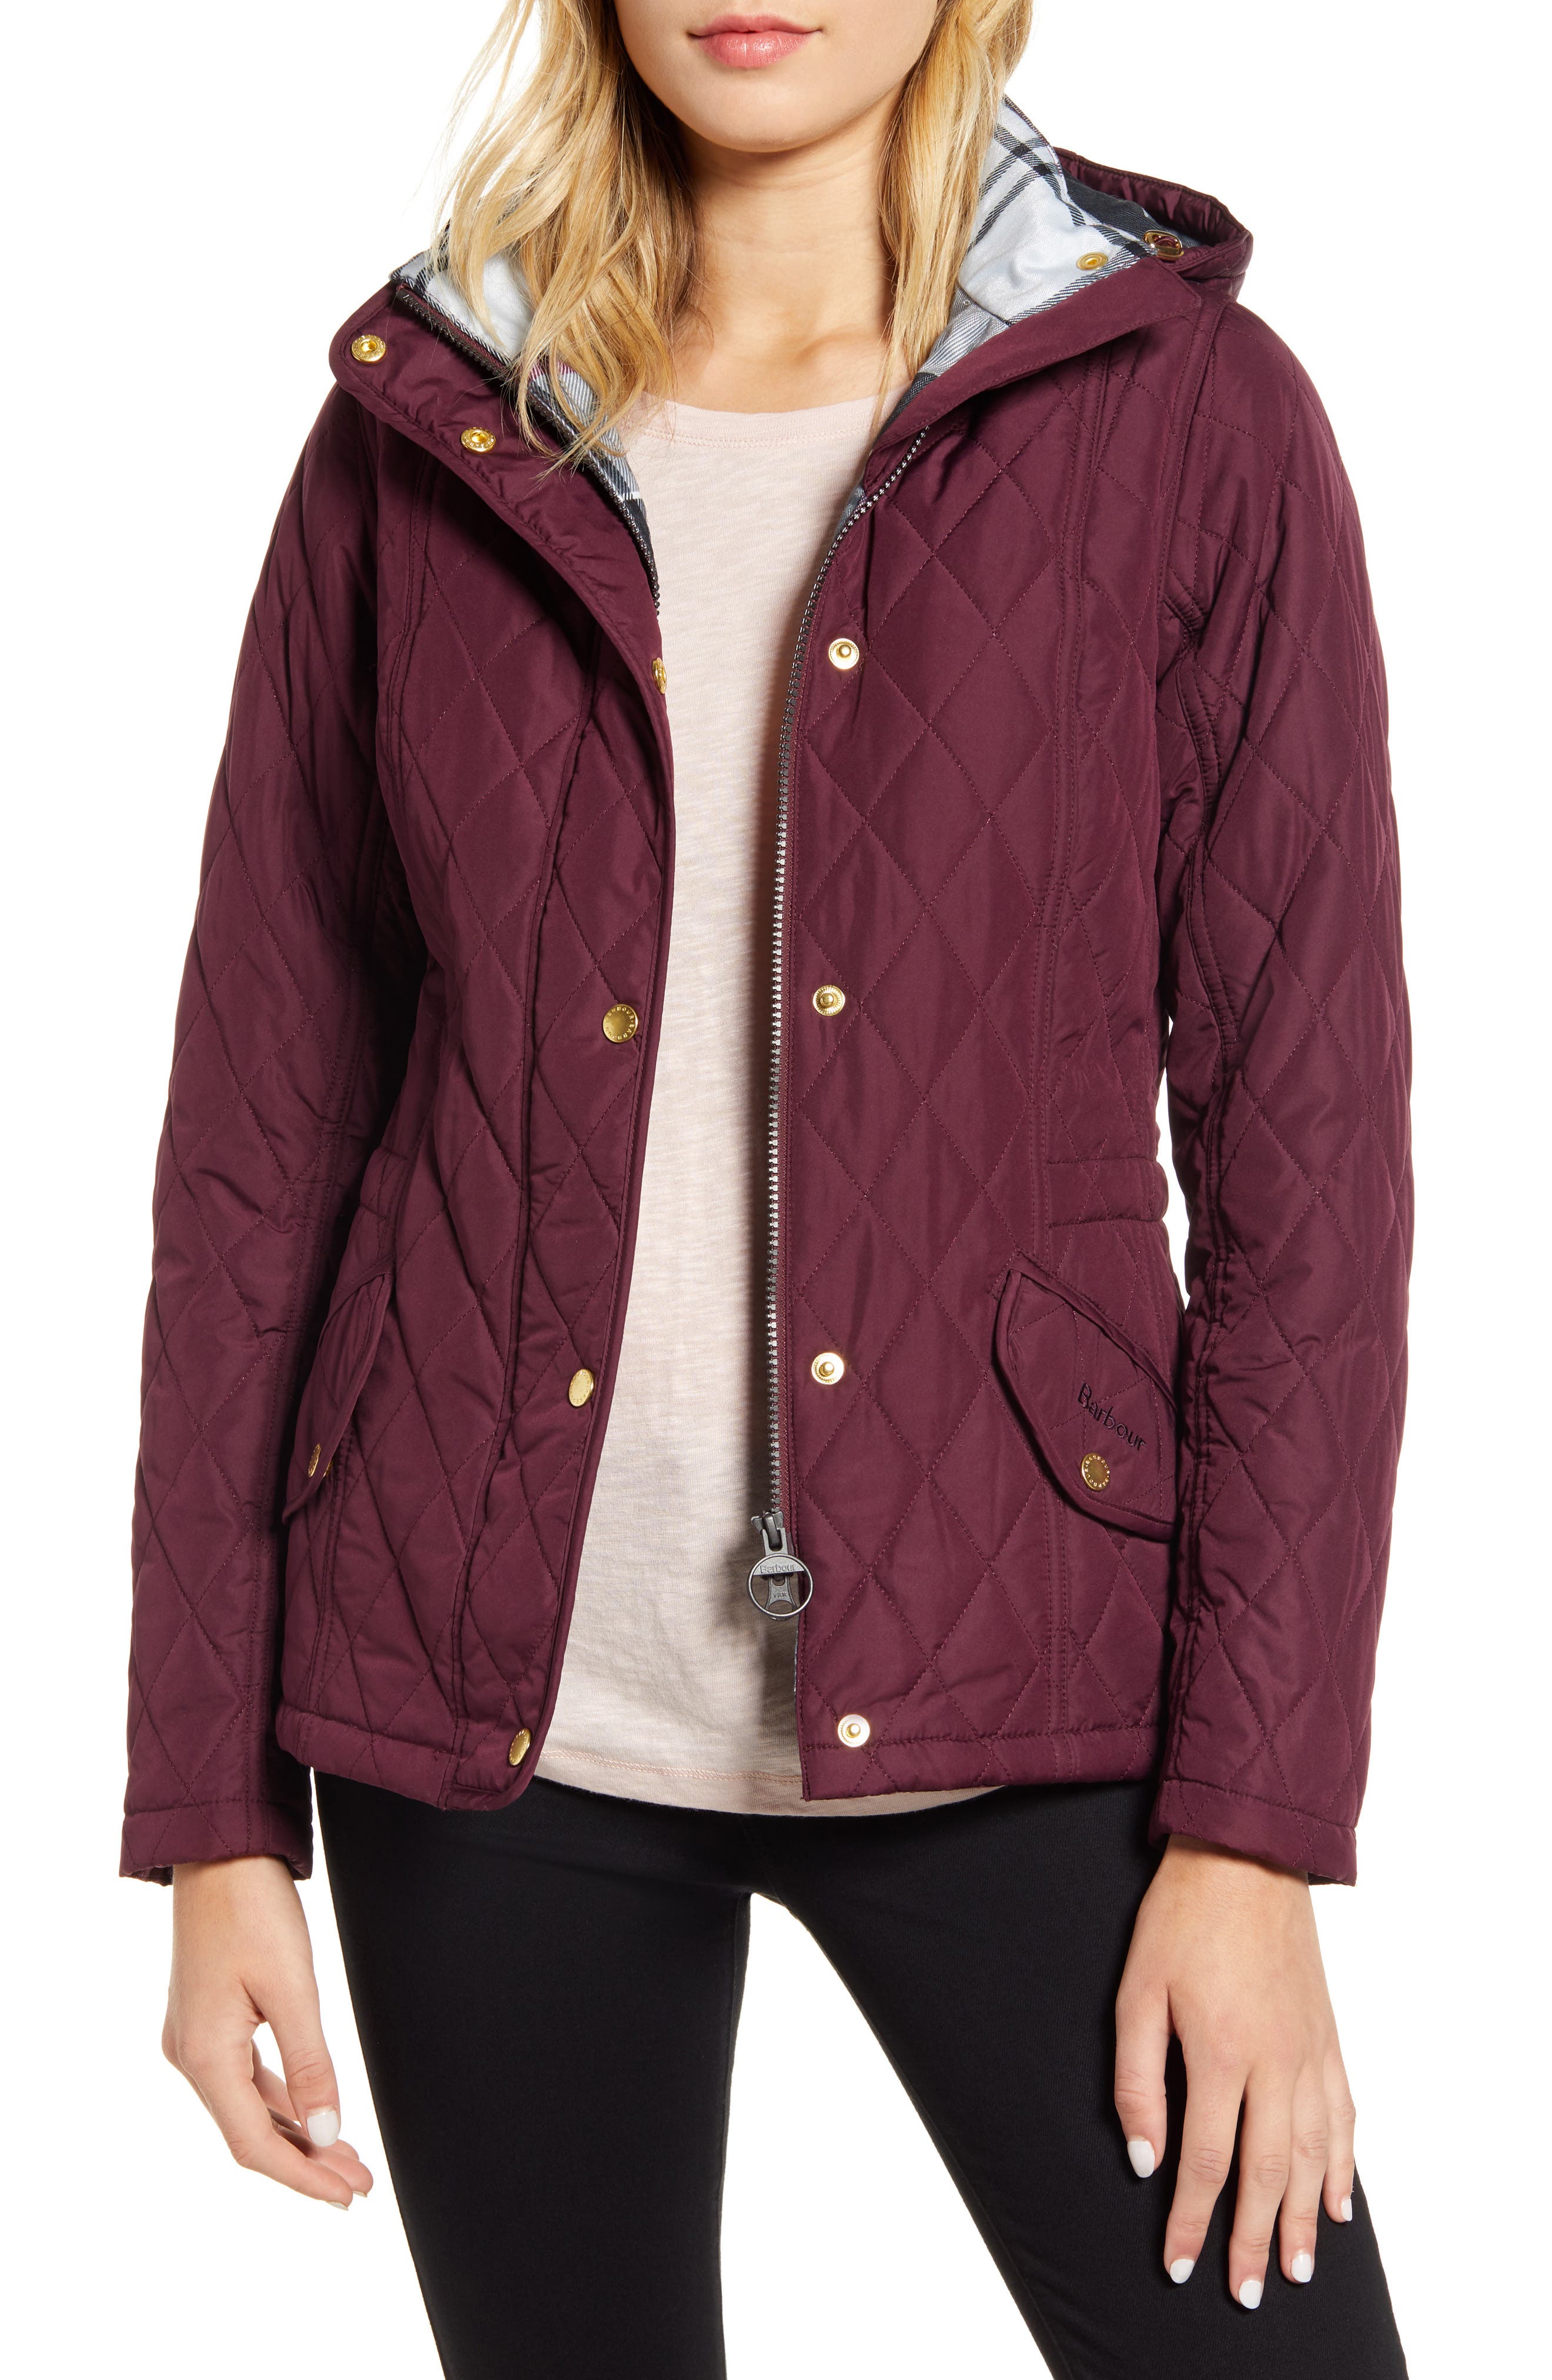 barbour millfire hooded quilted jacket